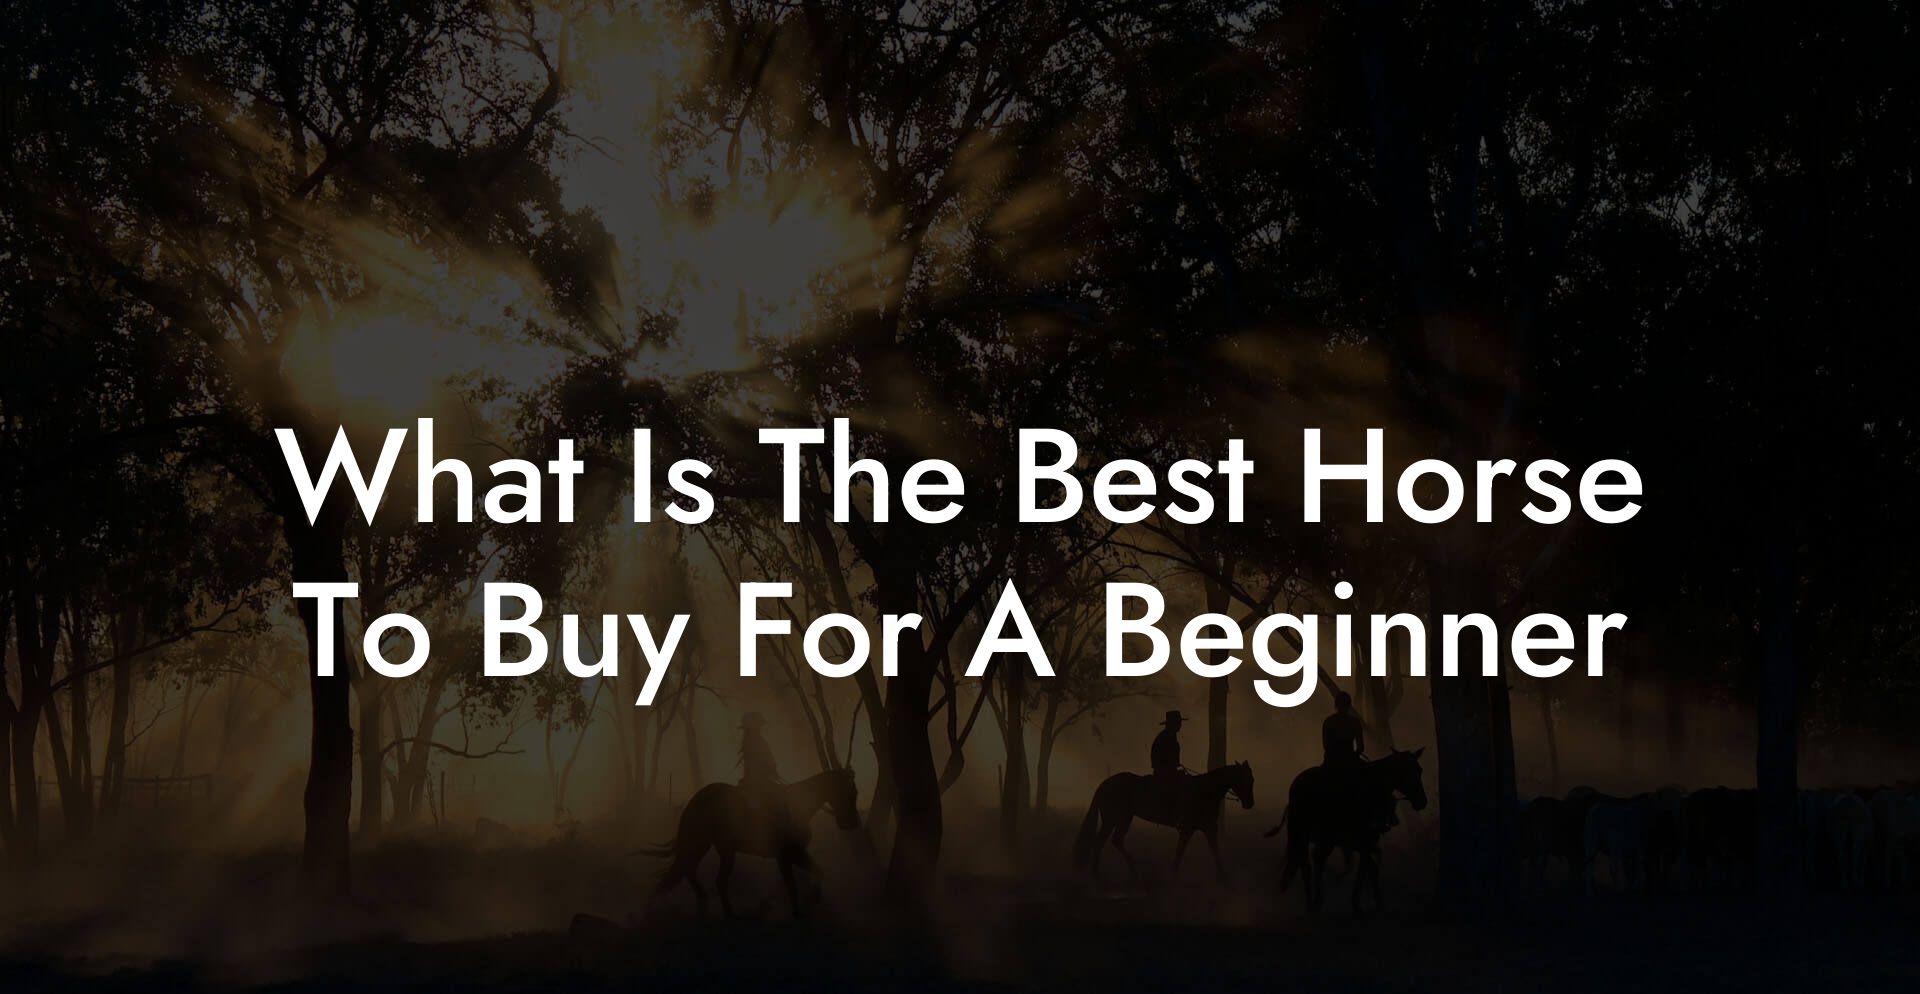 What Is The Best Horse To Buy For A Beginner